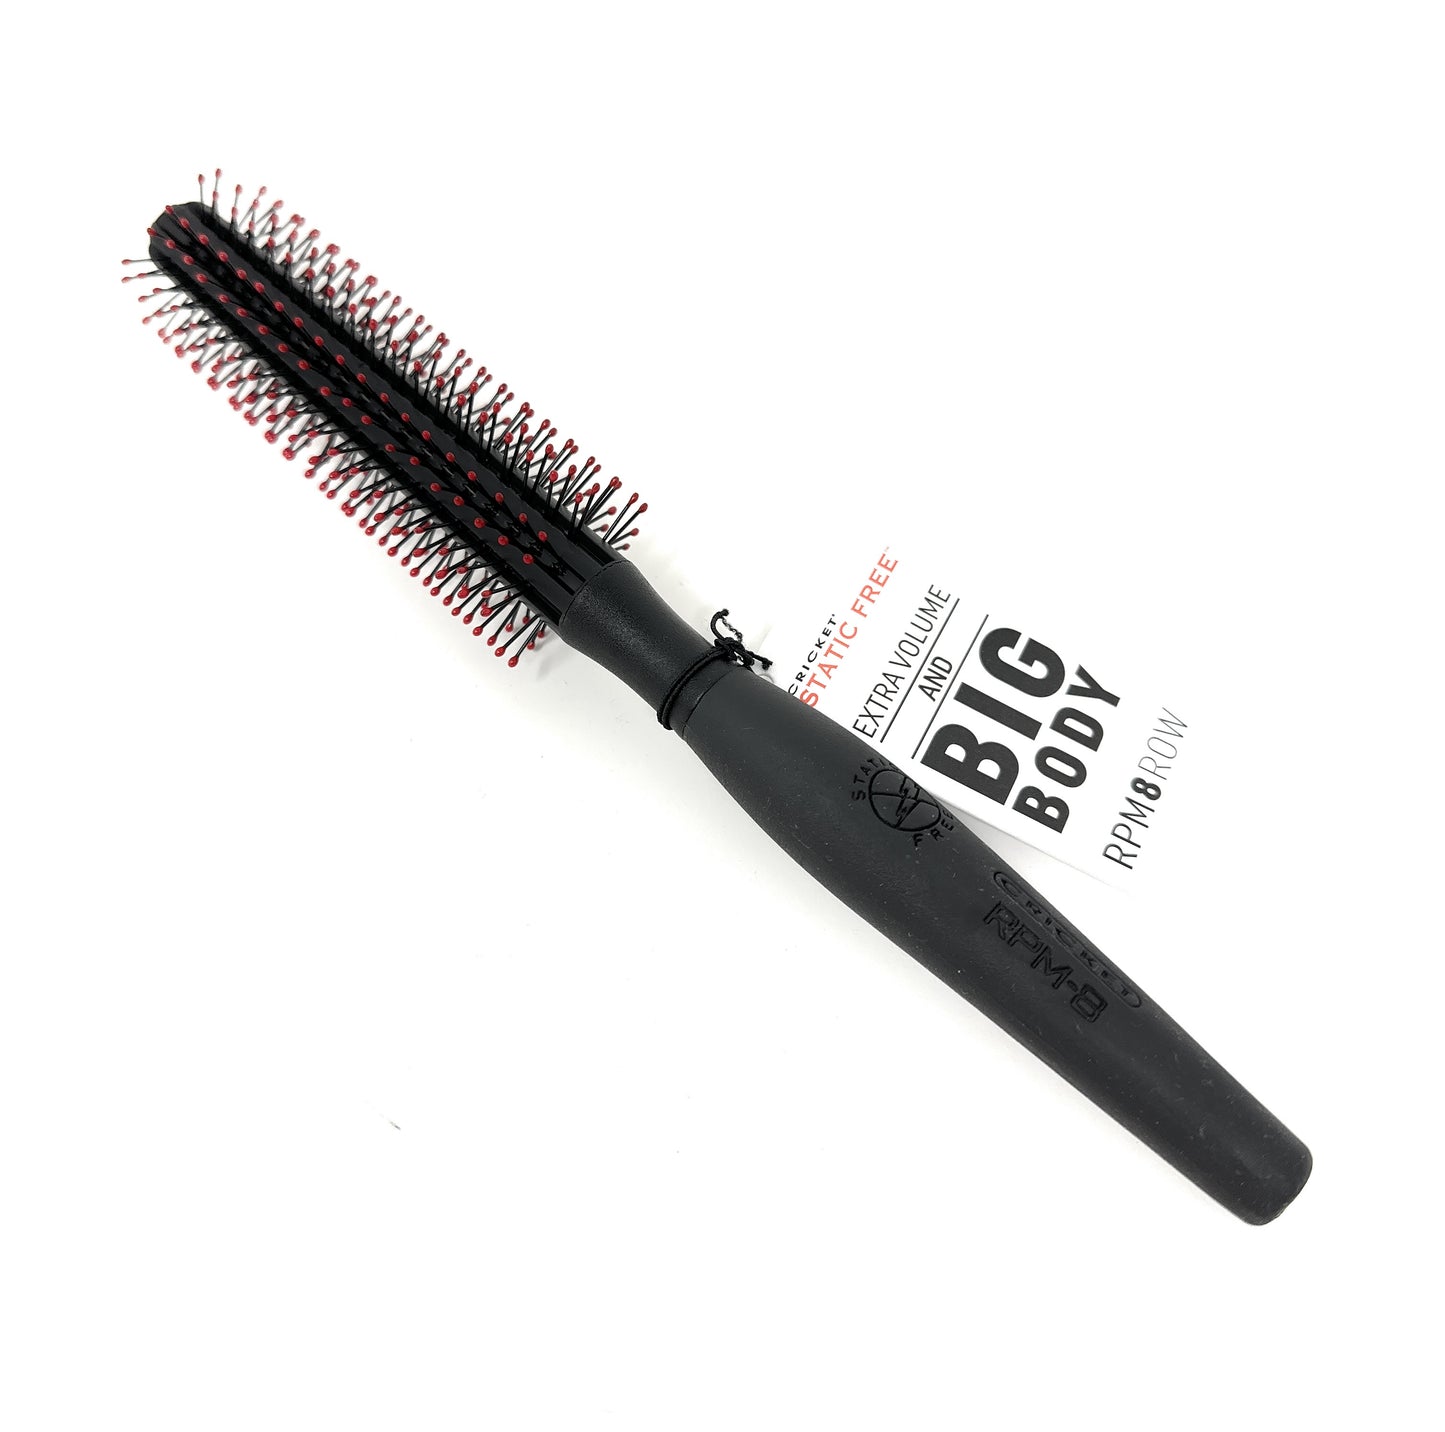 Cricket Static-Free 8-Row Round Hair Brush - Ideal for Blow Drying, Curling, and Styling All Hair Types 1 Piece